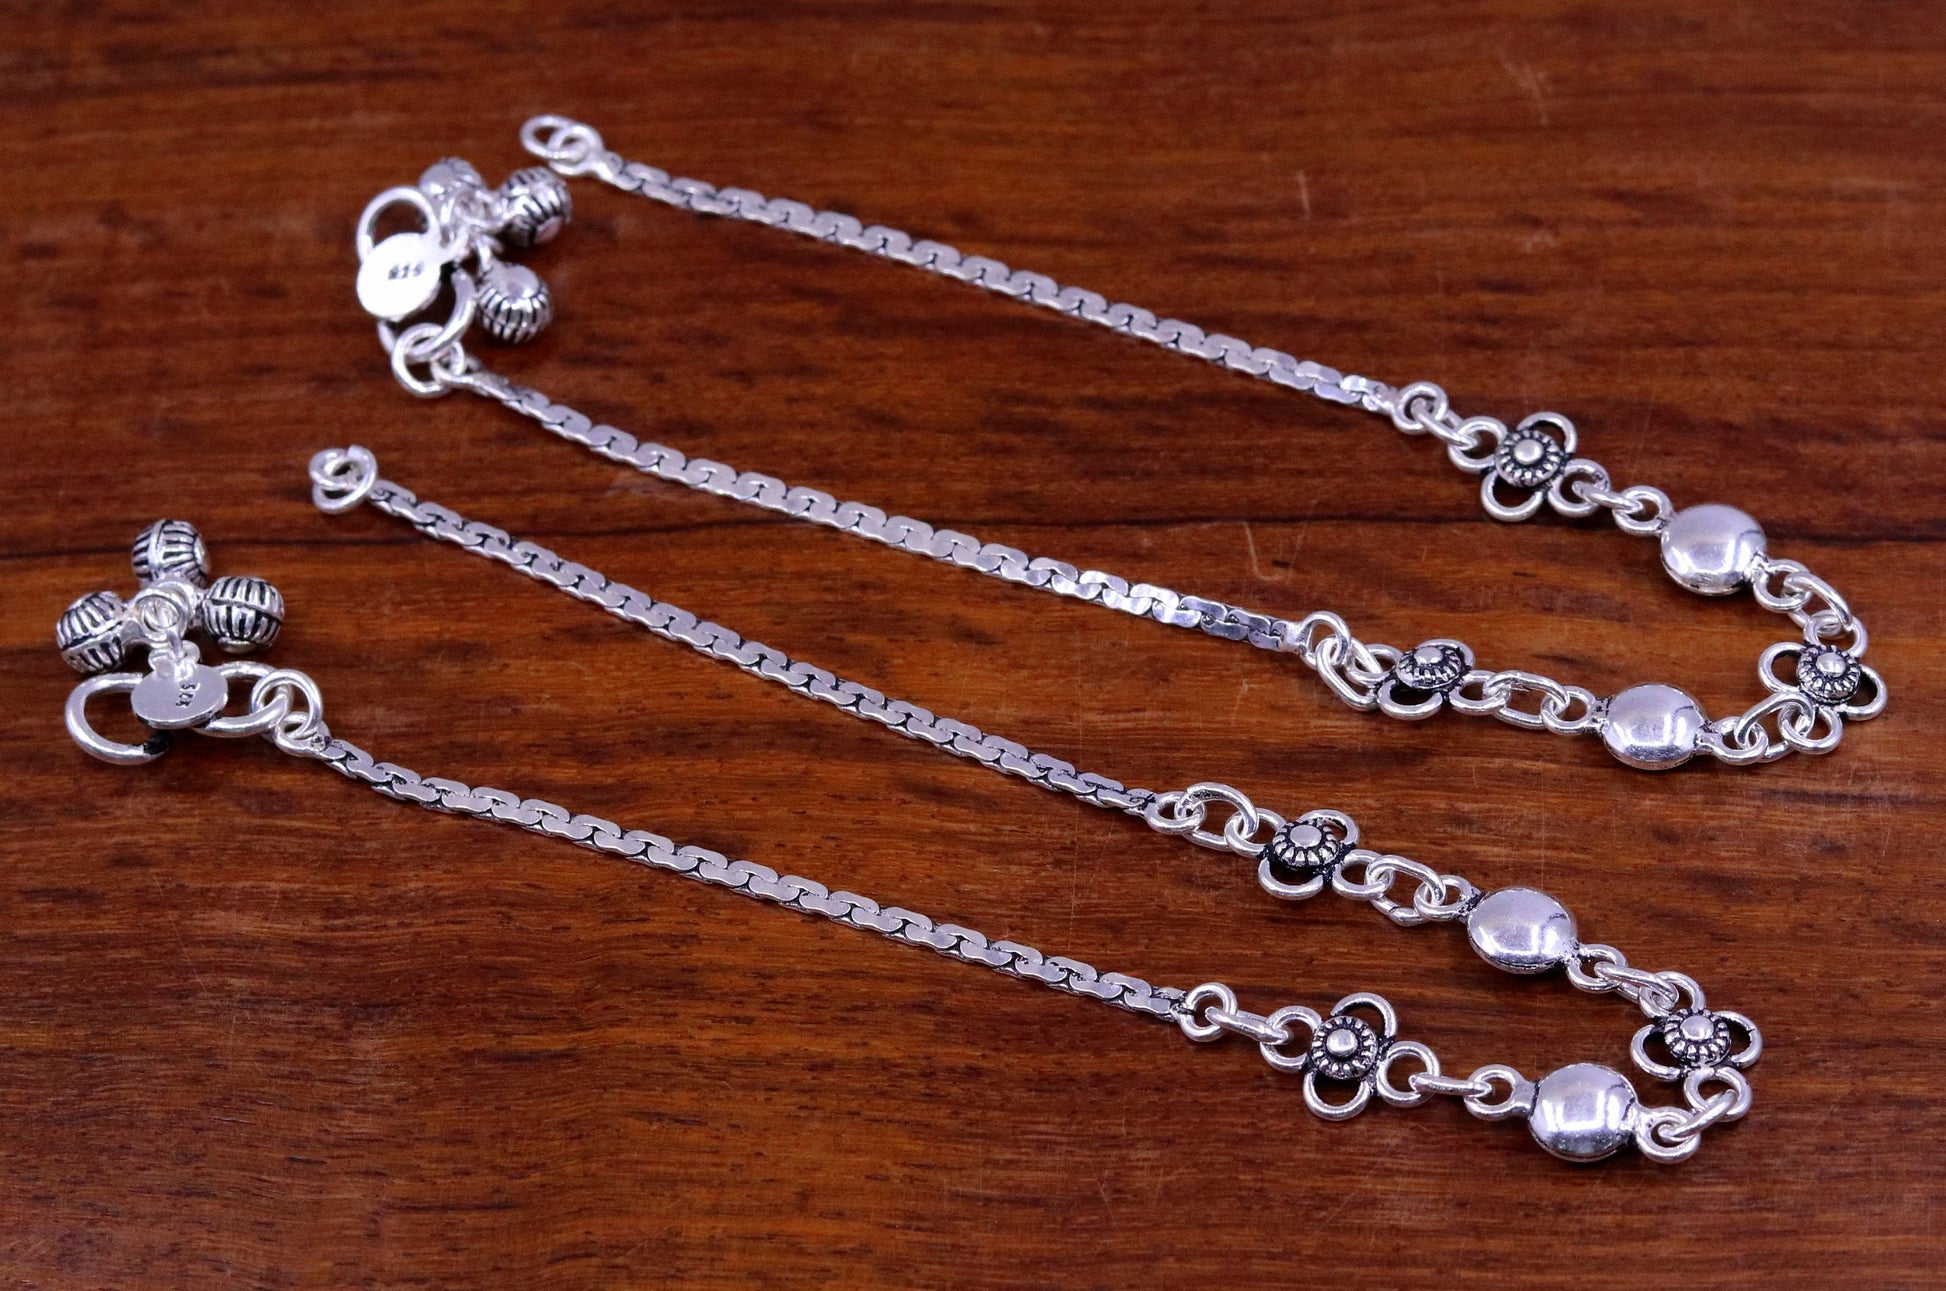 925 sterling silver handmade fabulous 10.5 inches long charm anklets, foot bracelet, belly dance jewelry bridesmaids ankle bracelet ank96 - TRIBAL ORNAMENTS